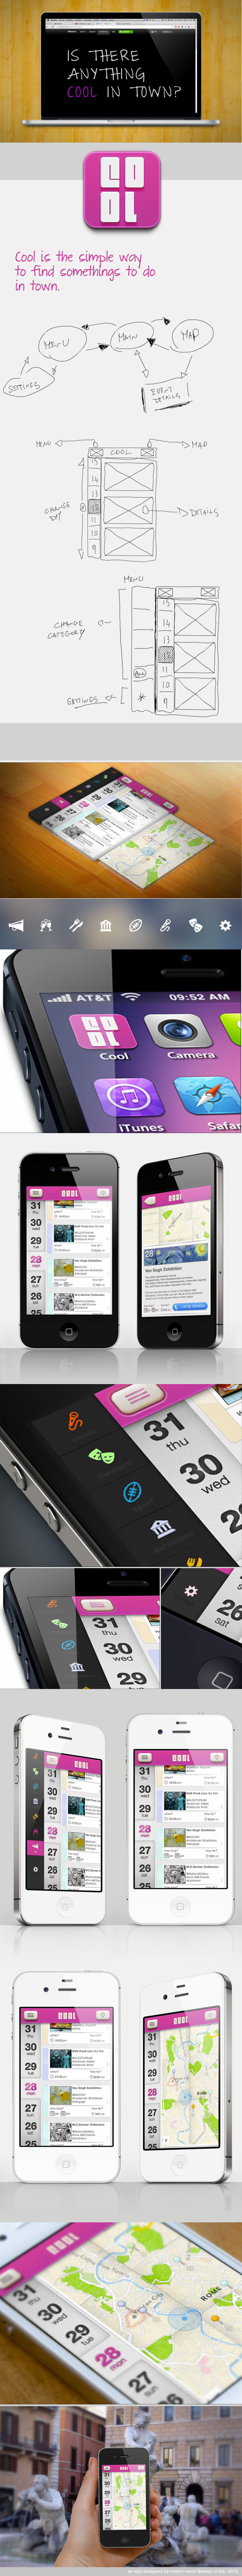 UI ux information architecture  interaction ios iphone mobile Events app